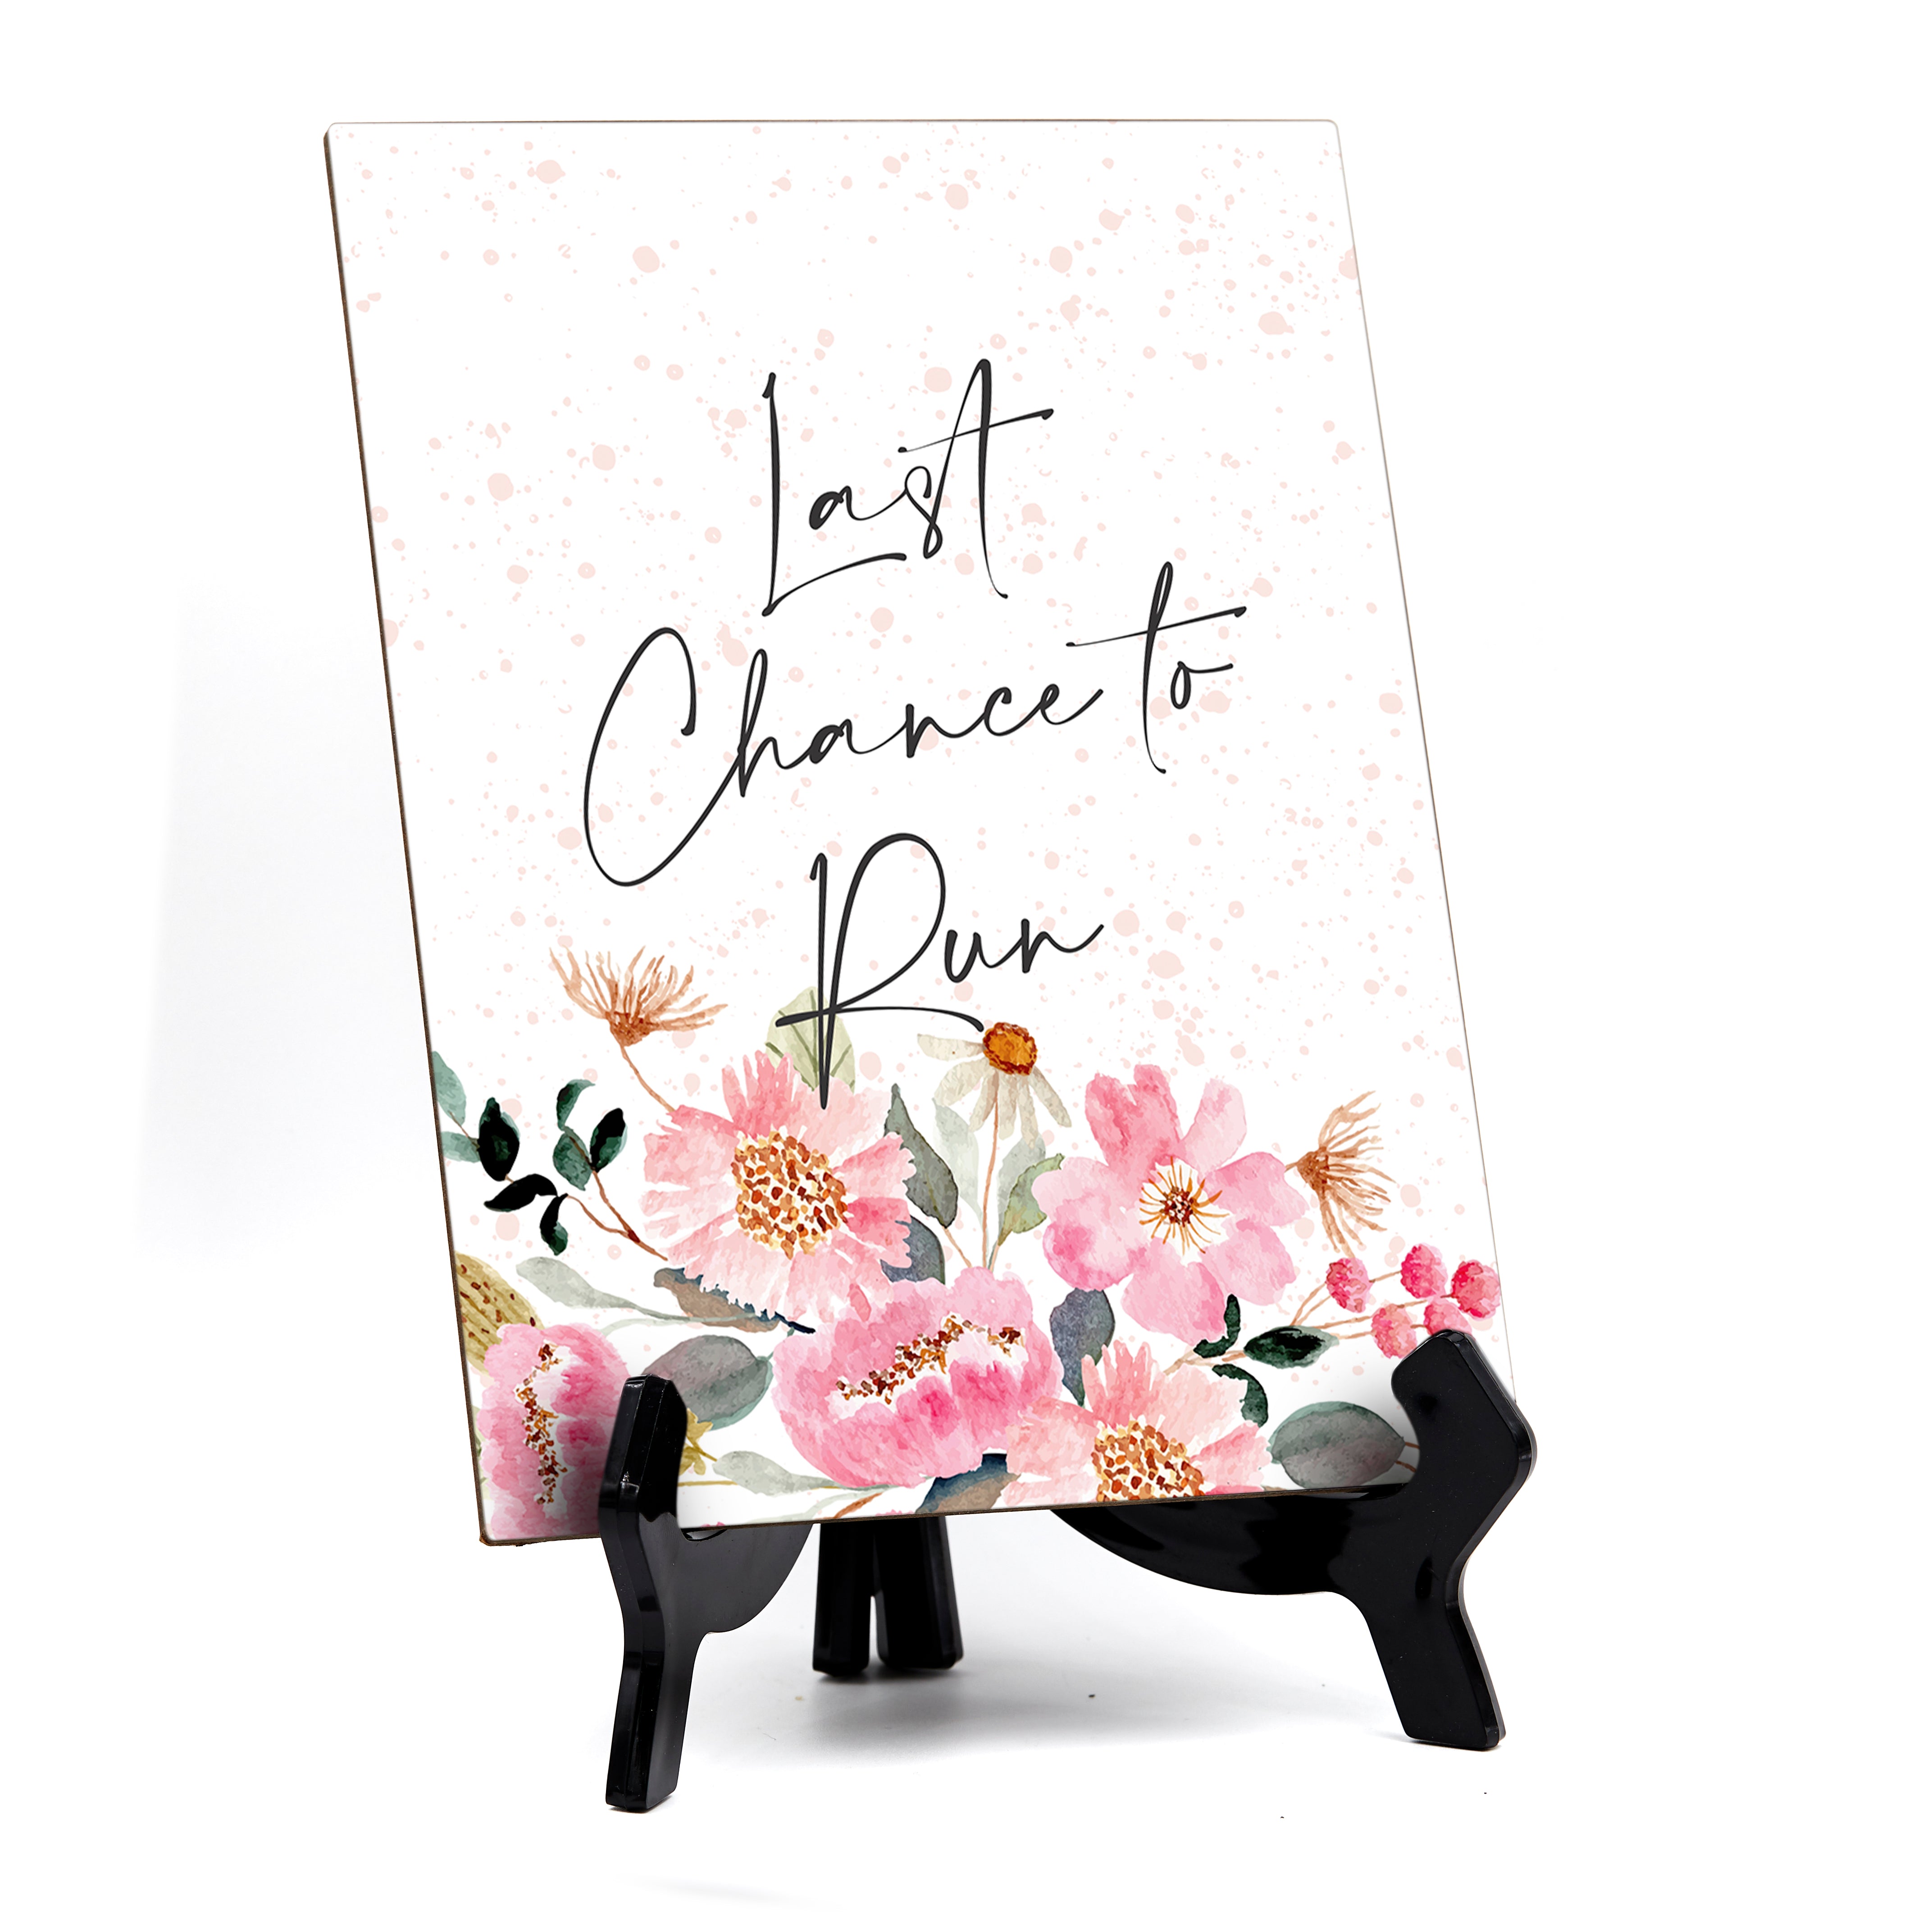 Last Chance to Run with Easel Table Sign, Floral Watercolor Design (6 x 8")